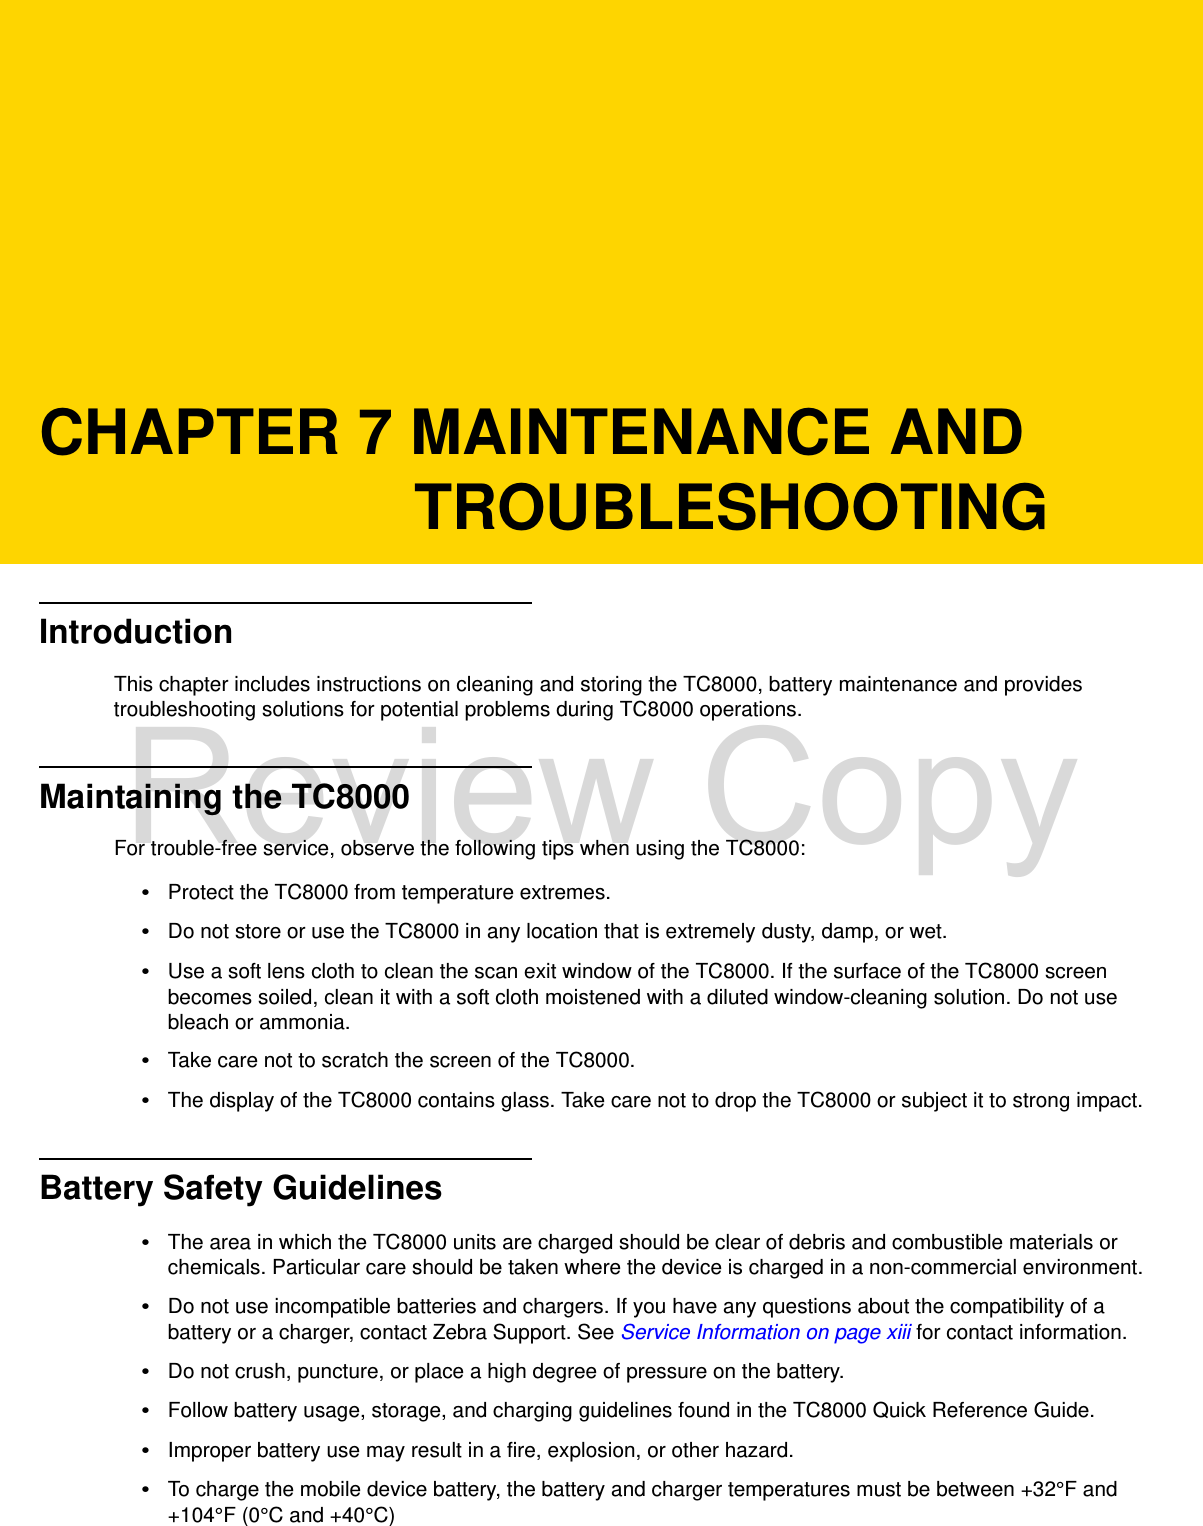 CHAPTER 7 MAINTENANCE AND TROUBLESHOOTINGIntroductionThis chapter includes instructions on cleaning and storing the TC8000, battery maintenance and provides troubleshooting solutions for potential problems during TC8000 operations.Maintaining the TC8000For trouble-free service, observe the following tips when using the TC8000:•Protect the TC8000 from temperature extremes.•Do not store or use the TC8000 in any location that is extremely dusty, damp, or wet.•Use a soft lens cloth to clean the scan exit window of the TC8000. If the surface of the TC8000 screen becomes soiled, clean it with a soft cloth moistened with a diluted window-cleaning solution. Do not use bleach or ammonia.•Take care not to scratch the screen of the TC8000.•The display of the TC8000 contains glass. Take care not to drop the TC8000 or subject it to strong impact.Battery Safety Guidelines•The area in which the TC8000 units are charged should be clear of debris and combustible materials or chemicals. Particular care should be taken where the device is charged in a non-commercial environment.•Do not use incompatible batteries and chargers. If you have any questions about the compatibility of a battery or a charger, contact Zebra Support. See Service Information on page xiii for contact information.•Do not crush, puncture, or place a high degree of pressure on the battery.•Follow battery usage, storage, and charging guidelines found in the TC8000 Quick Reference Guide.•Improper battery use may result in a fire, explosion, or other hazard.•To charge the mobile device battery, the battery and charger temperatures must be between +32°F and +104°F (0°C and +40°C) Review Copy